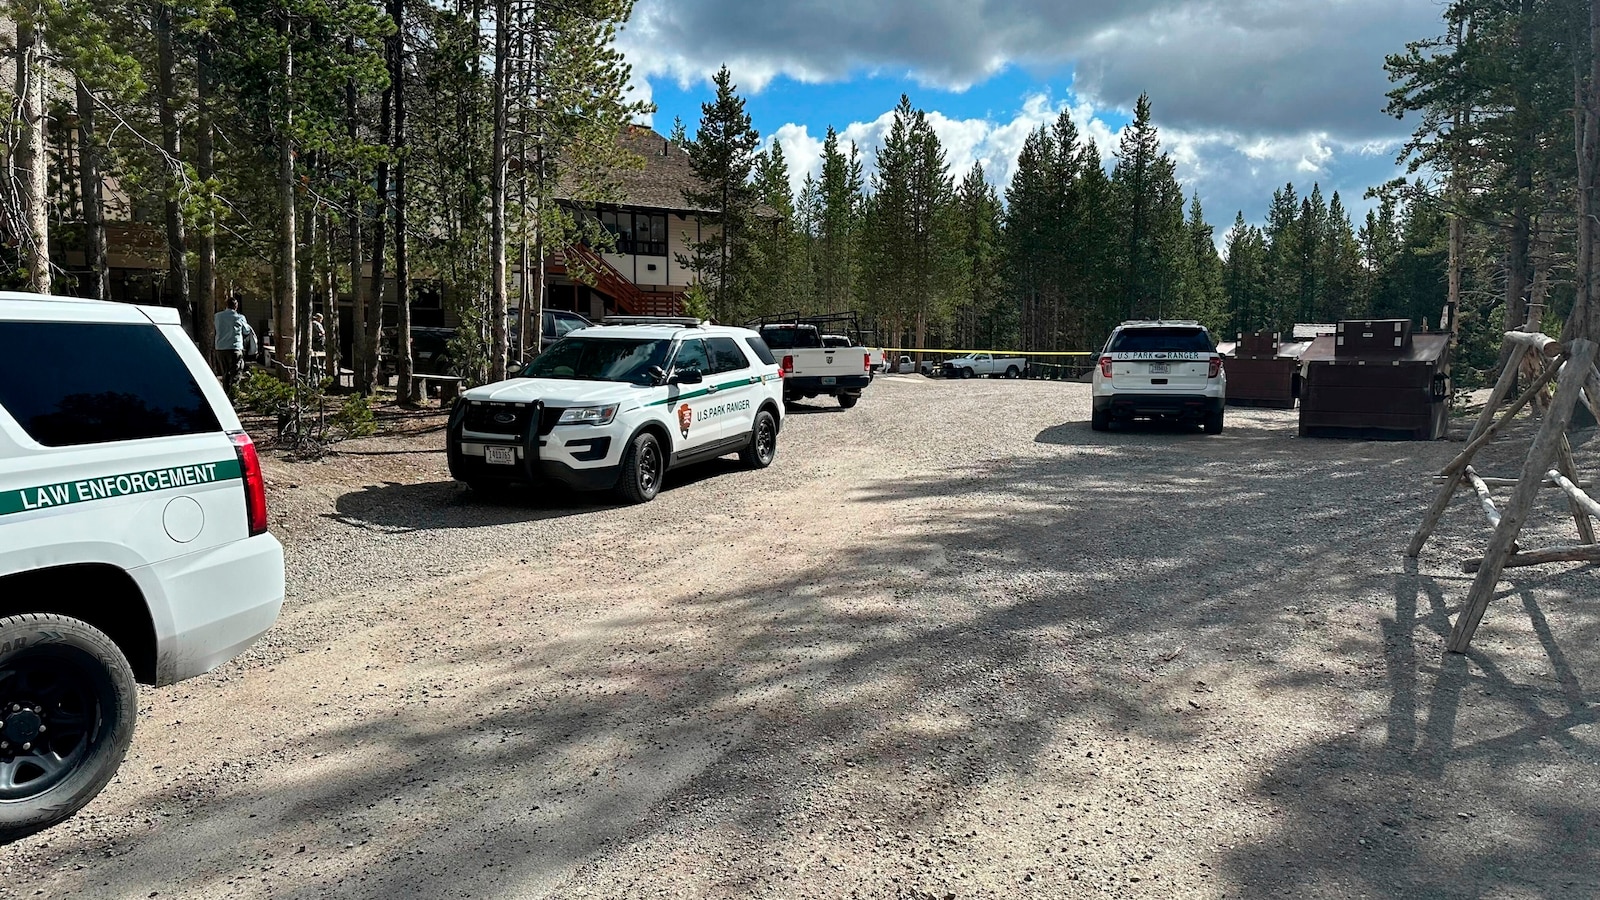 Man fatally shot by park rangers at national park allegedly threatened mass shooting